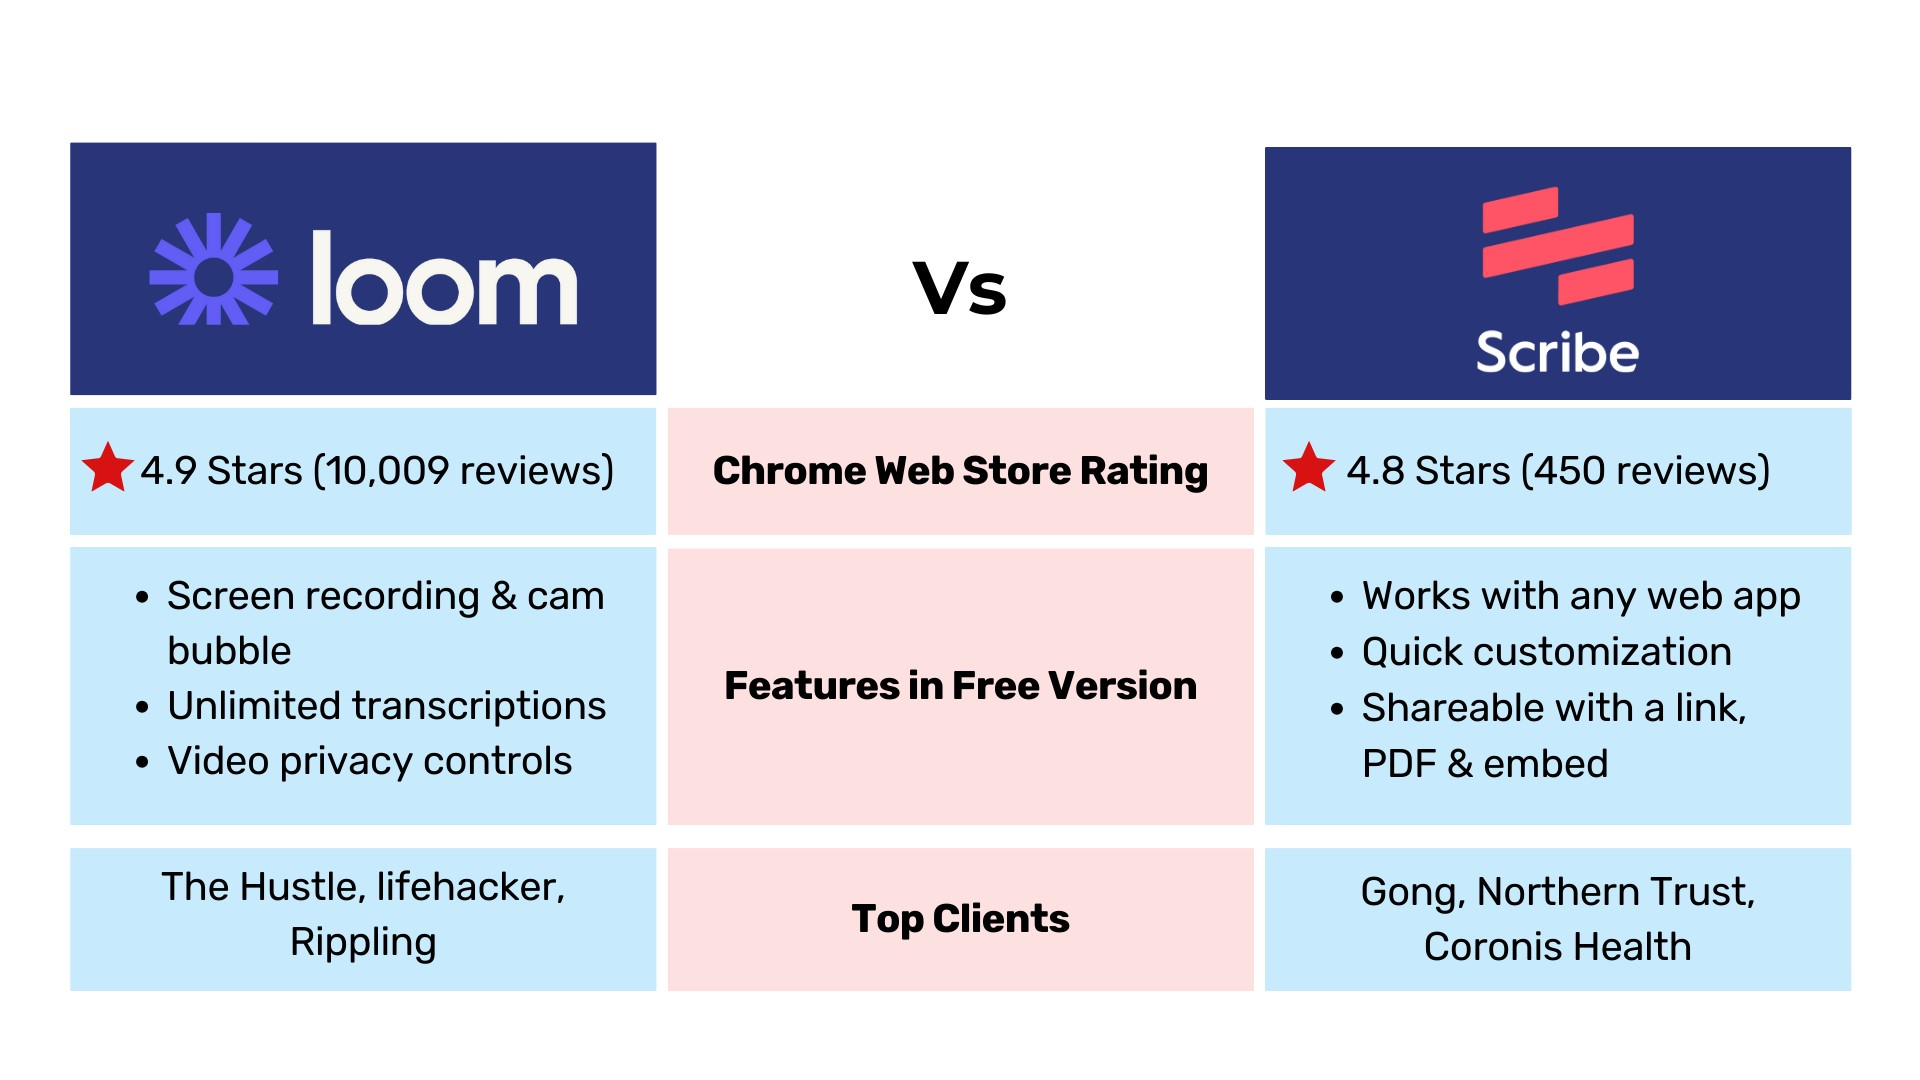 Loom Vs Scribe comparison table with rating, features, top clients